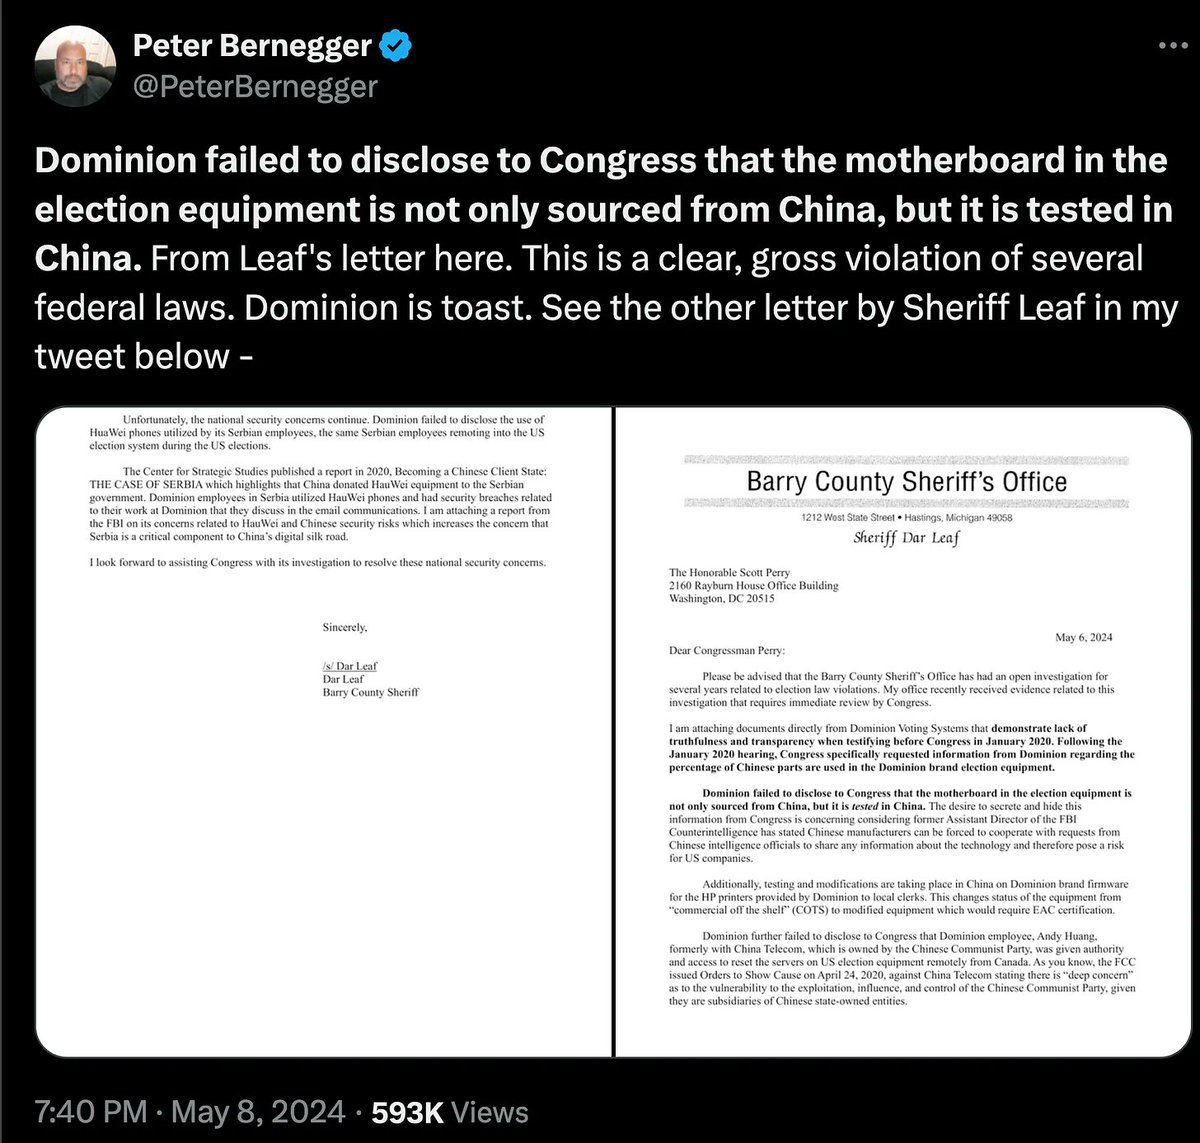 DOMINION HAS VIOLATED FEDERAL LAWS ACCORDING TO THESE FINDINGS - NO MORE VOTING MACHINES. Sheriff Dar Leaf has discovered that Dominion Voting has failed to disclose to Congress that parts of their machines are sourced from China, and tested in China. In addition, it’s